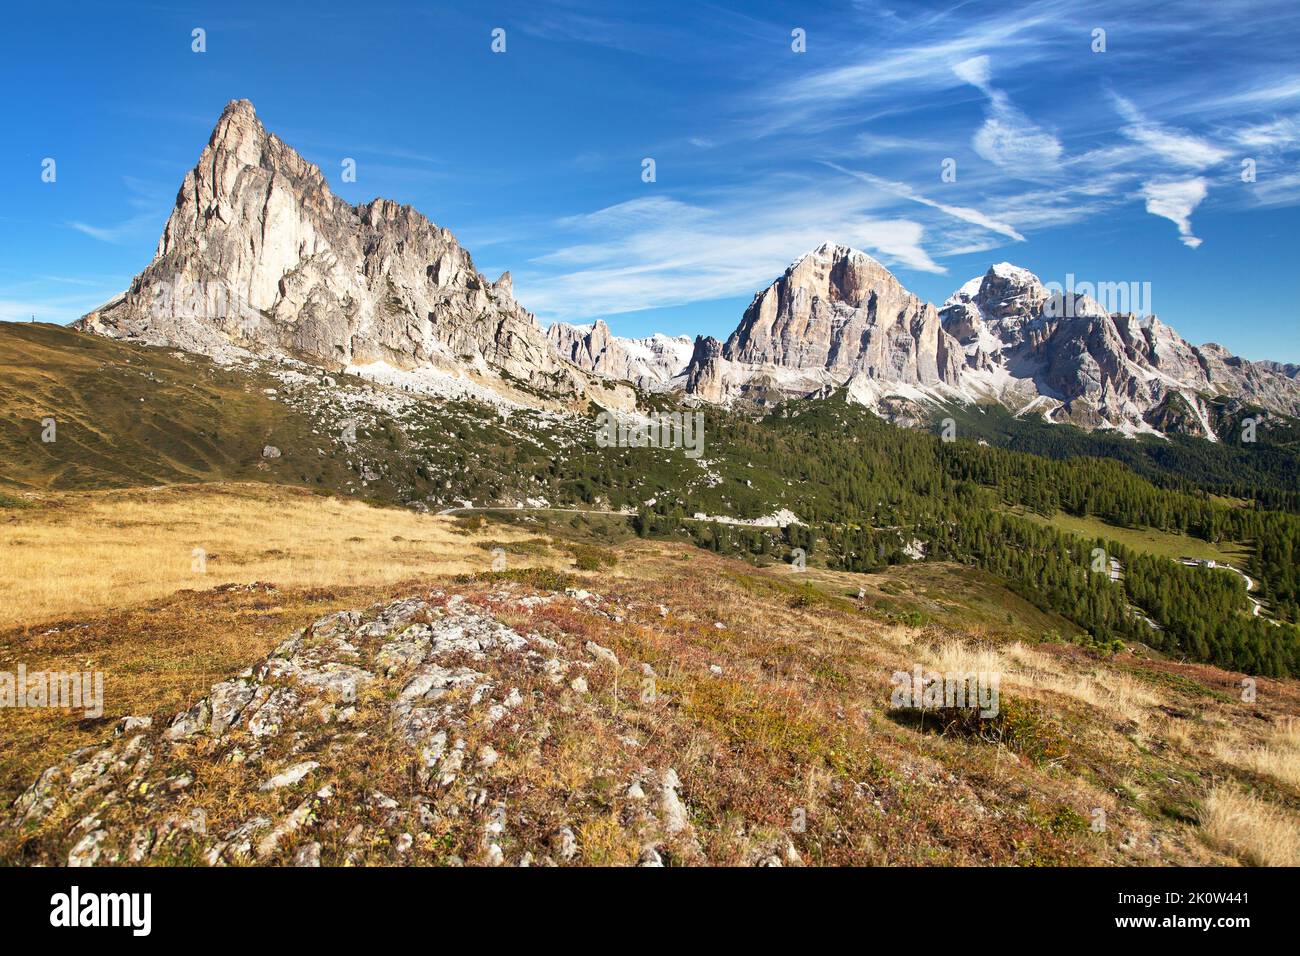 View from passo Giau to mount Ra Gusela from Nuvolau gruppe and Tofana or Le Tofane Gruppe with clouds, Dolomites mountains, Italy Stock Photo